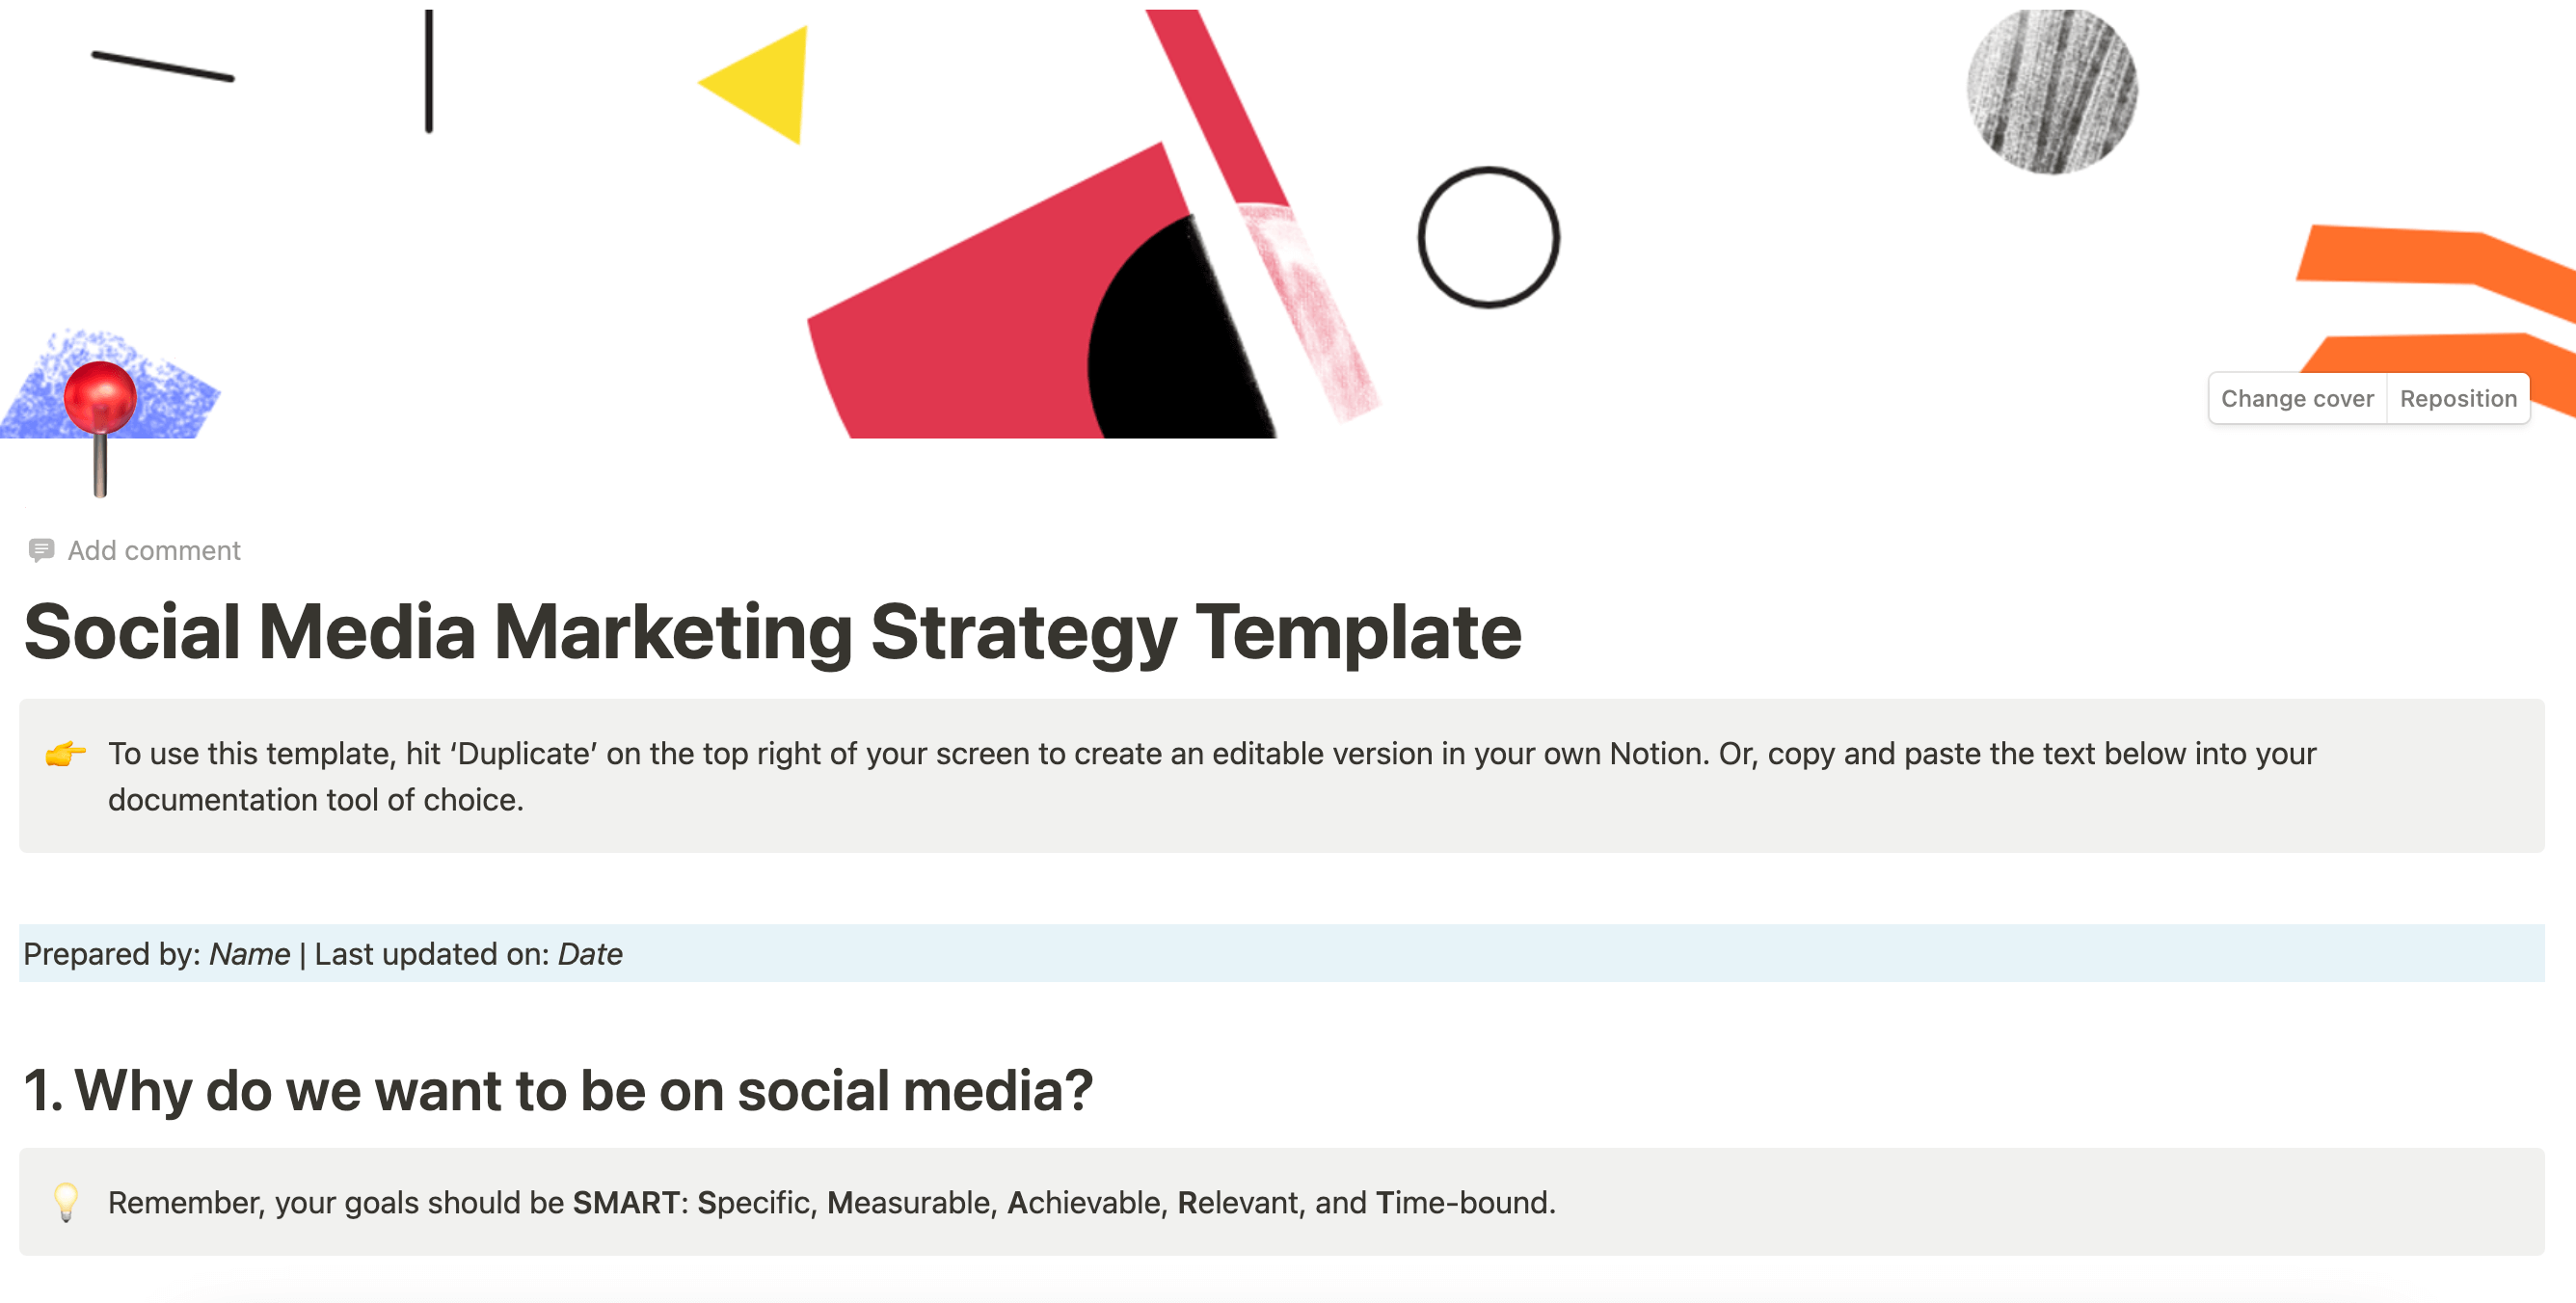 Social media marketing strategy template in Notion